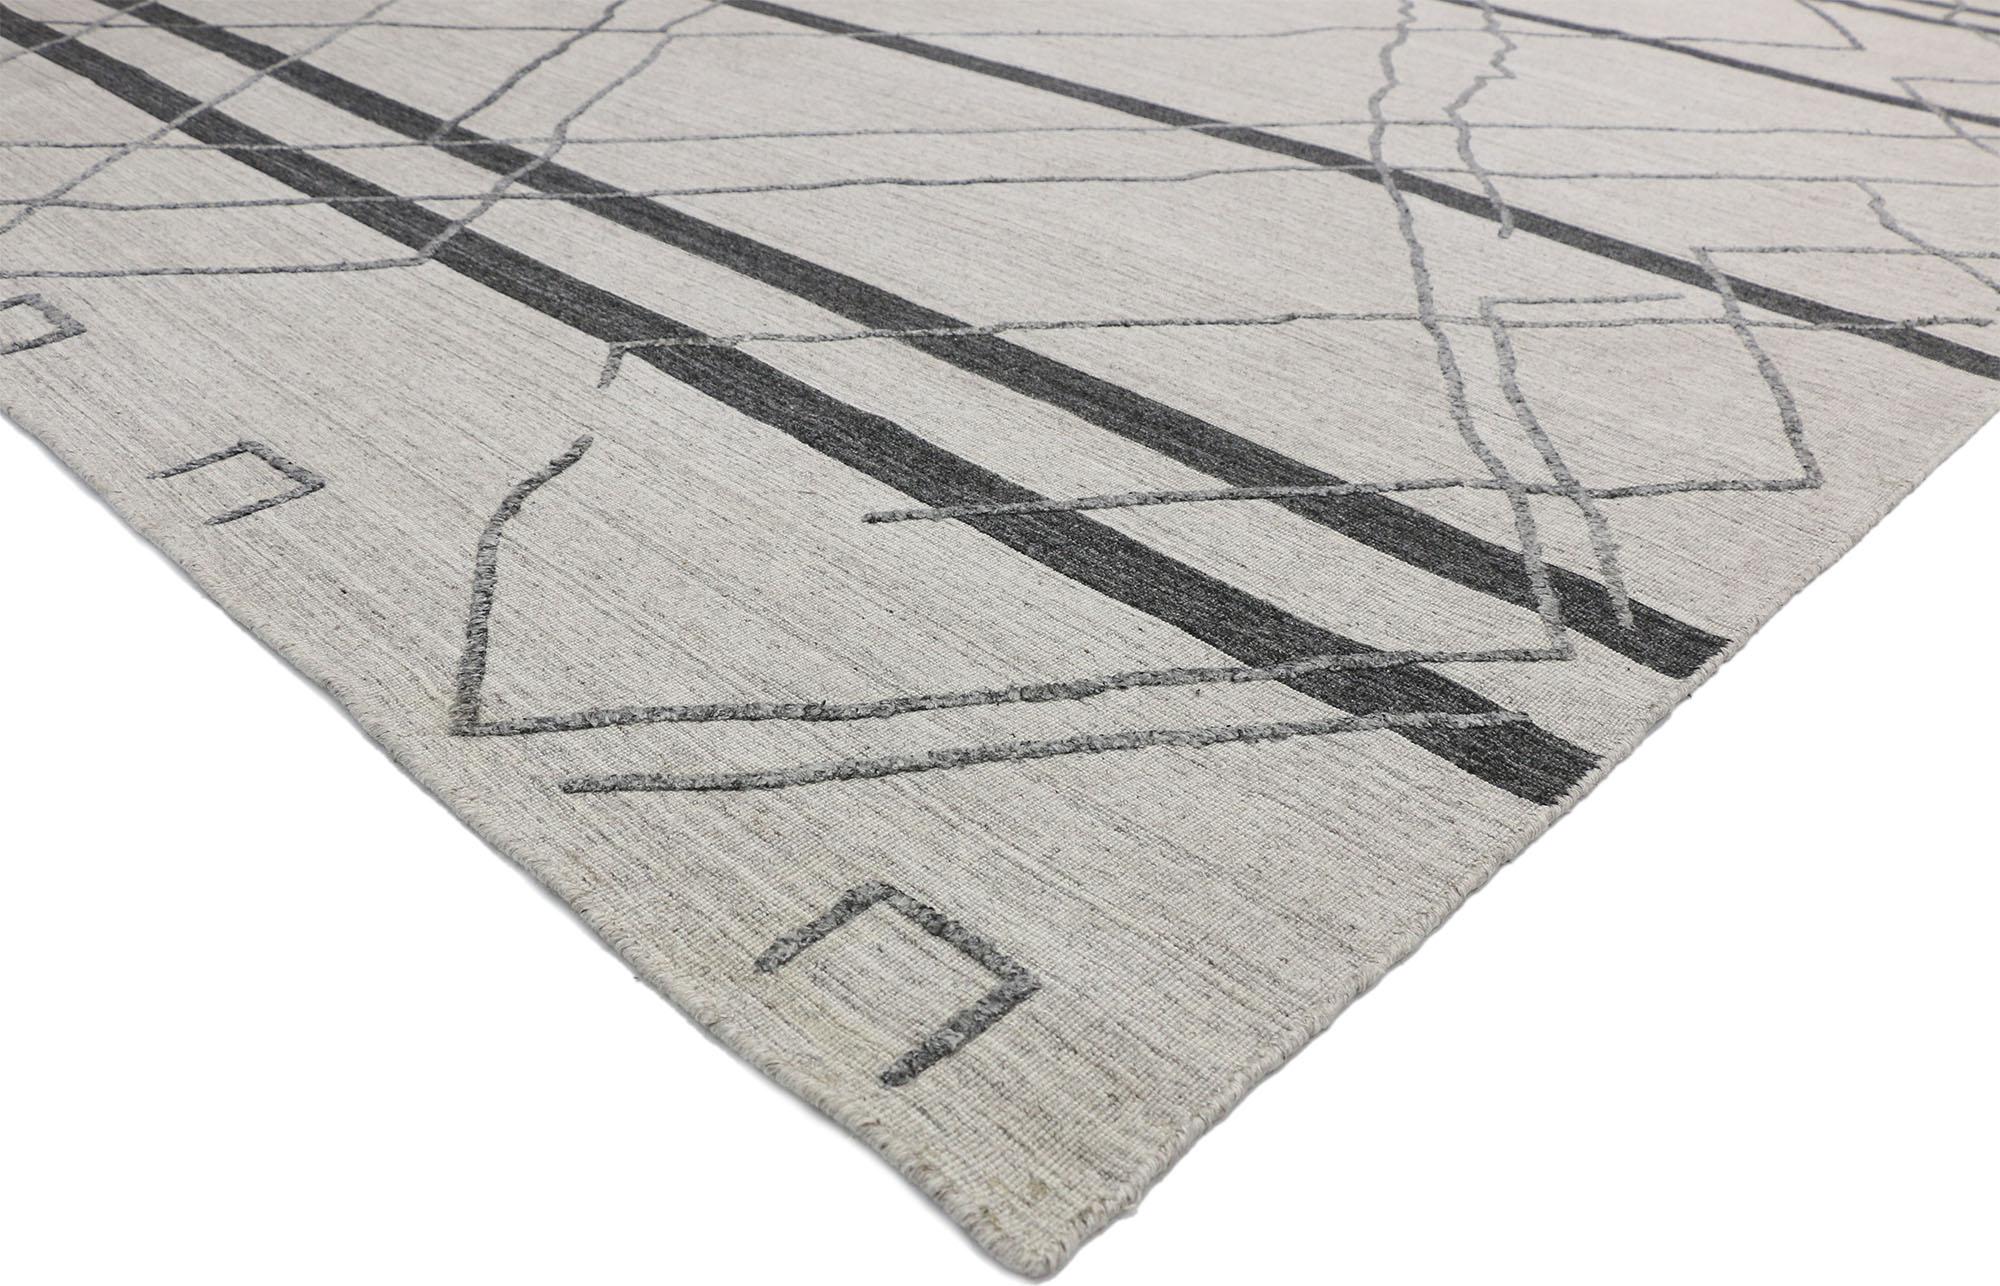 30406 New Gray Modern Textured Rug with Moroccan Trellis Raised Design. Warm hygge vibes meet tribal designs in this contemporary Moroccan style gray rug. A dynamic fusion of contemporary trends and nomadic tribal traditions, this Moroccan print